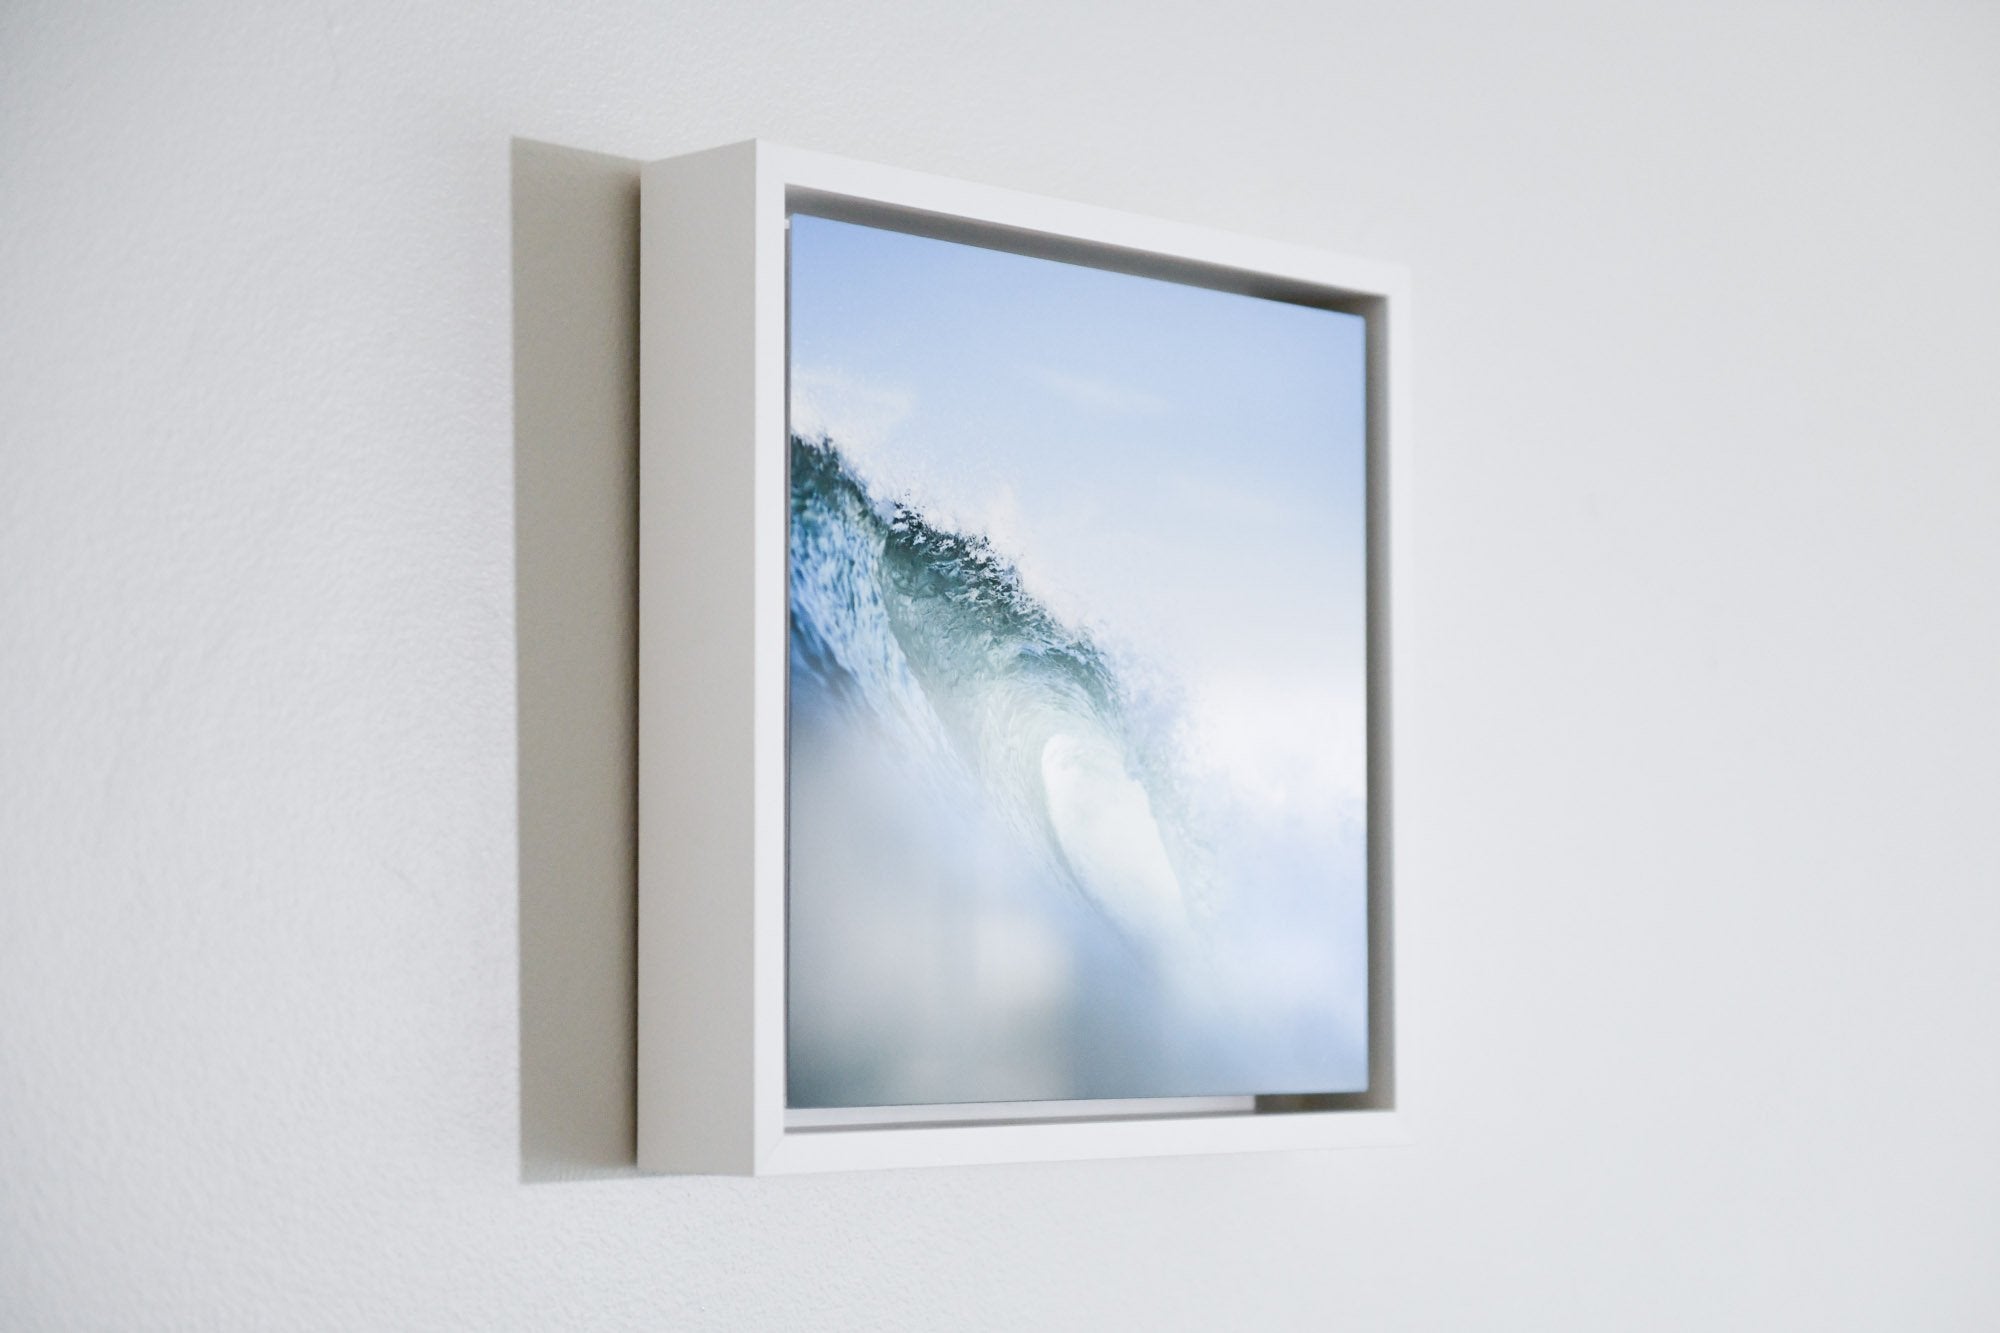 Cate Brown Photo Ocean Waves // Copy of Framed Metal Print 10x10" // MULTIPLE Available Available Inventory Ocean Fine Art